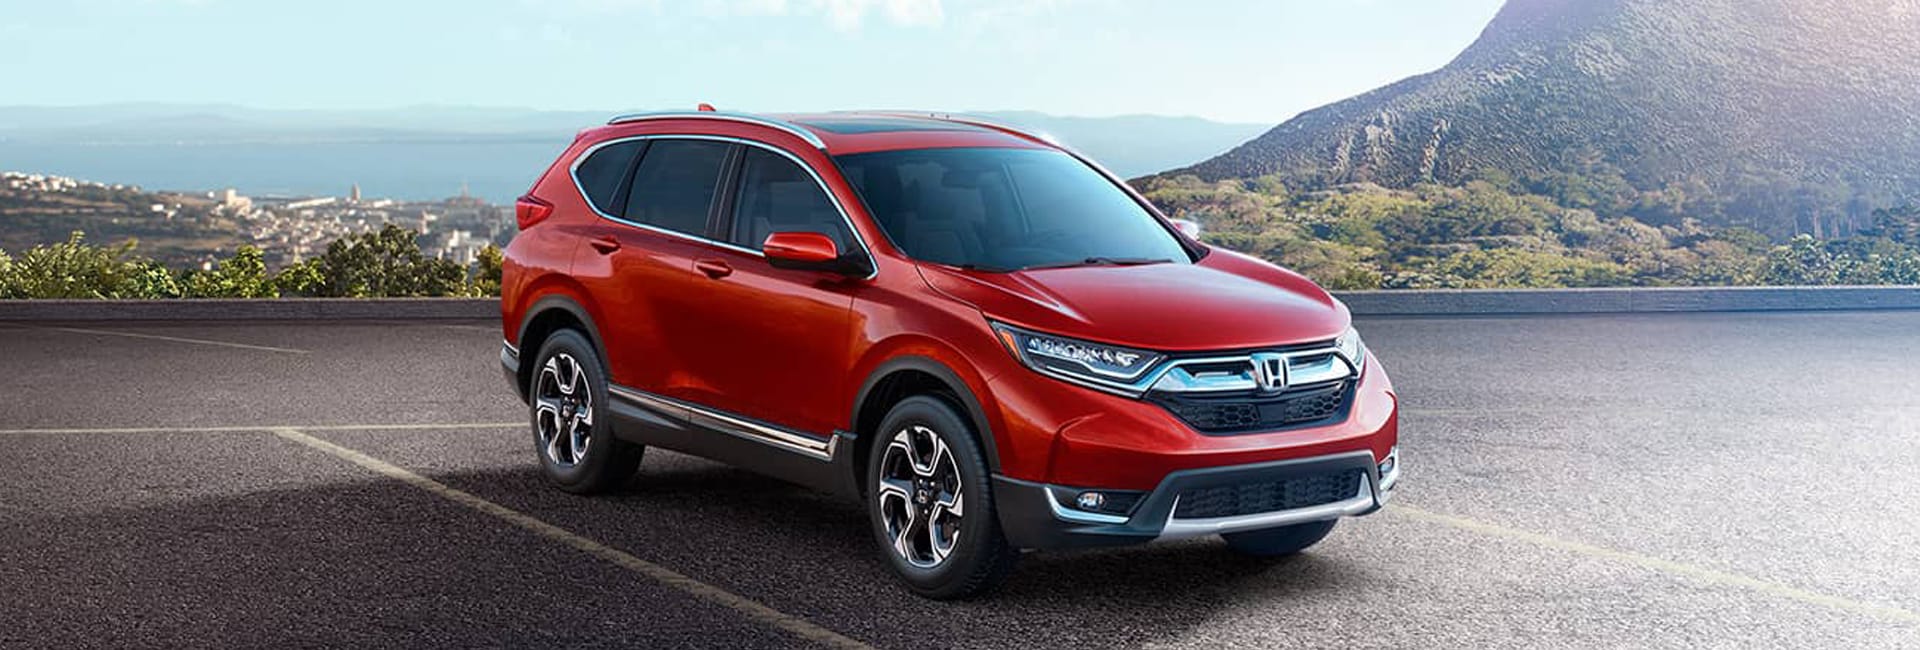 Honda CR-V Interior and Exterior Vehicle Features